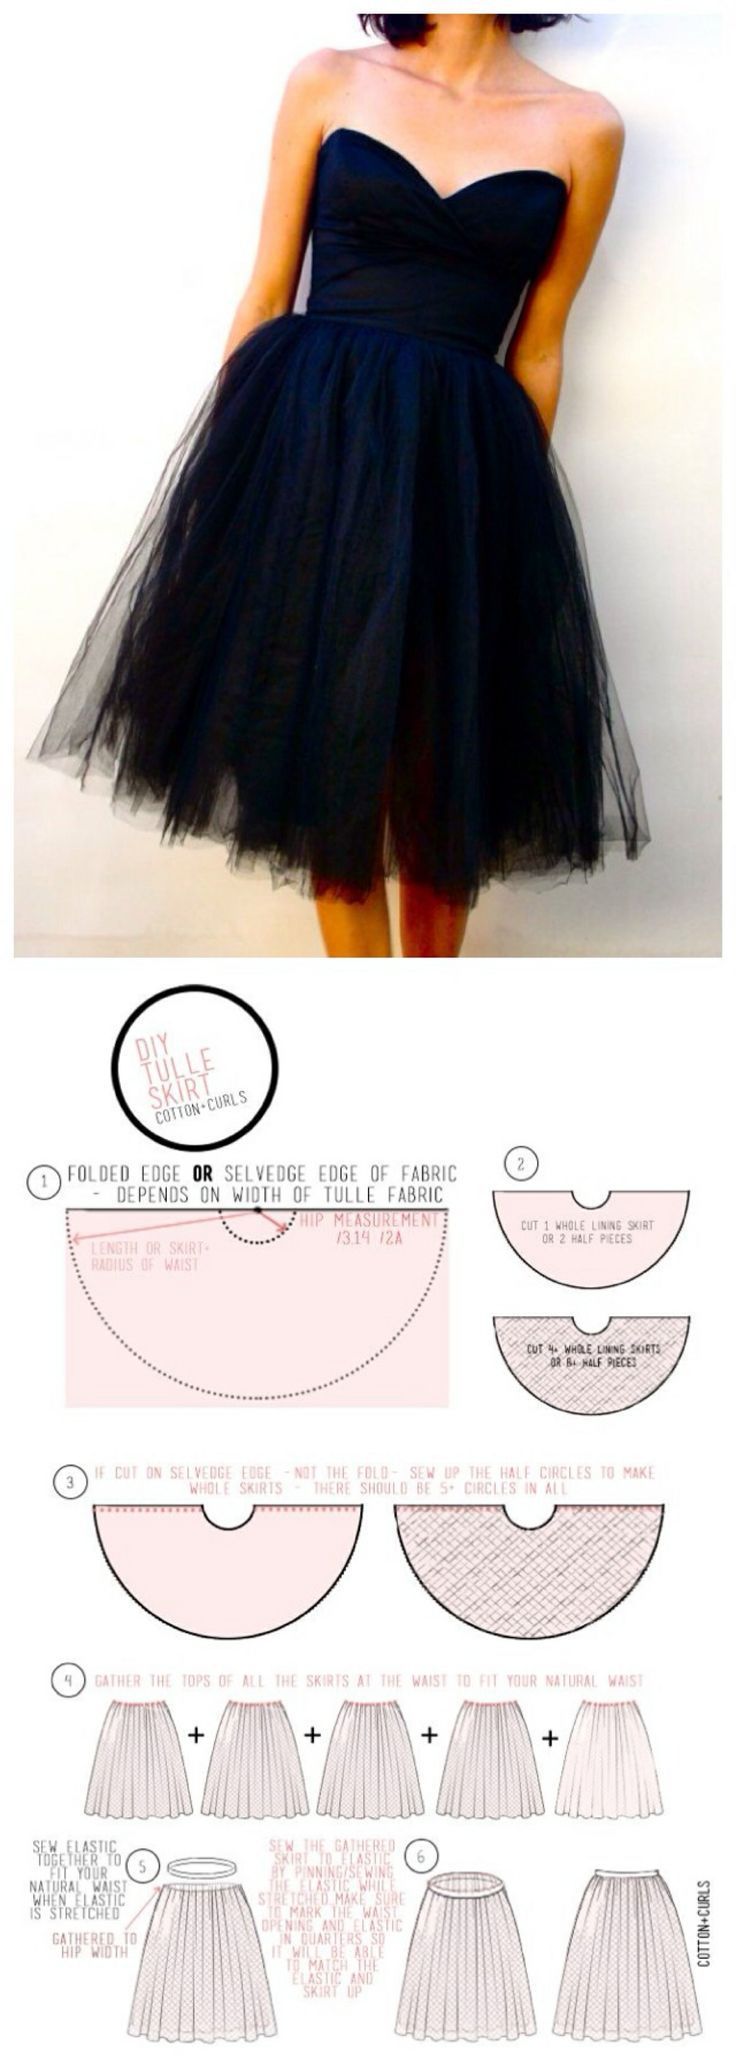 DIY tulle skirt – Gorgeous skirt sewing pattern for special occasions or just thos